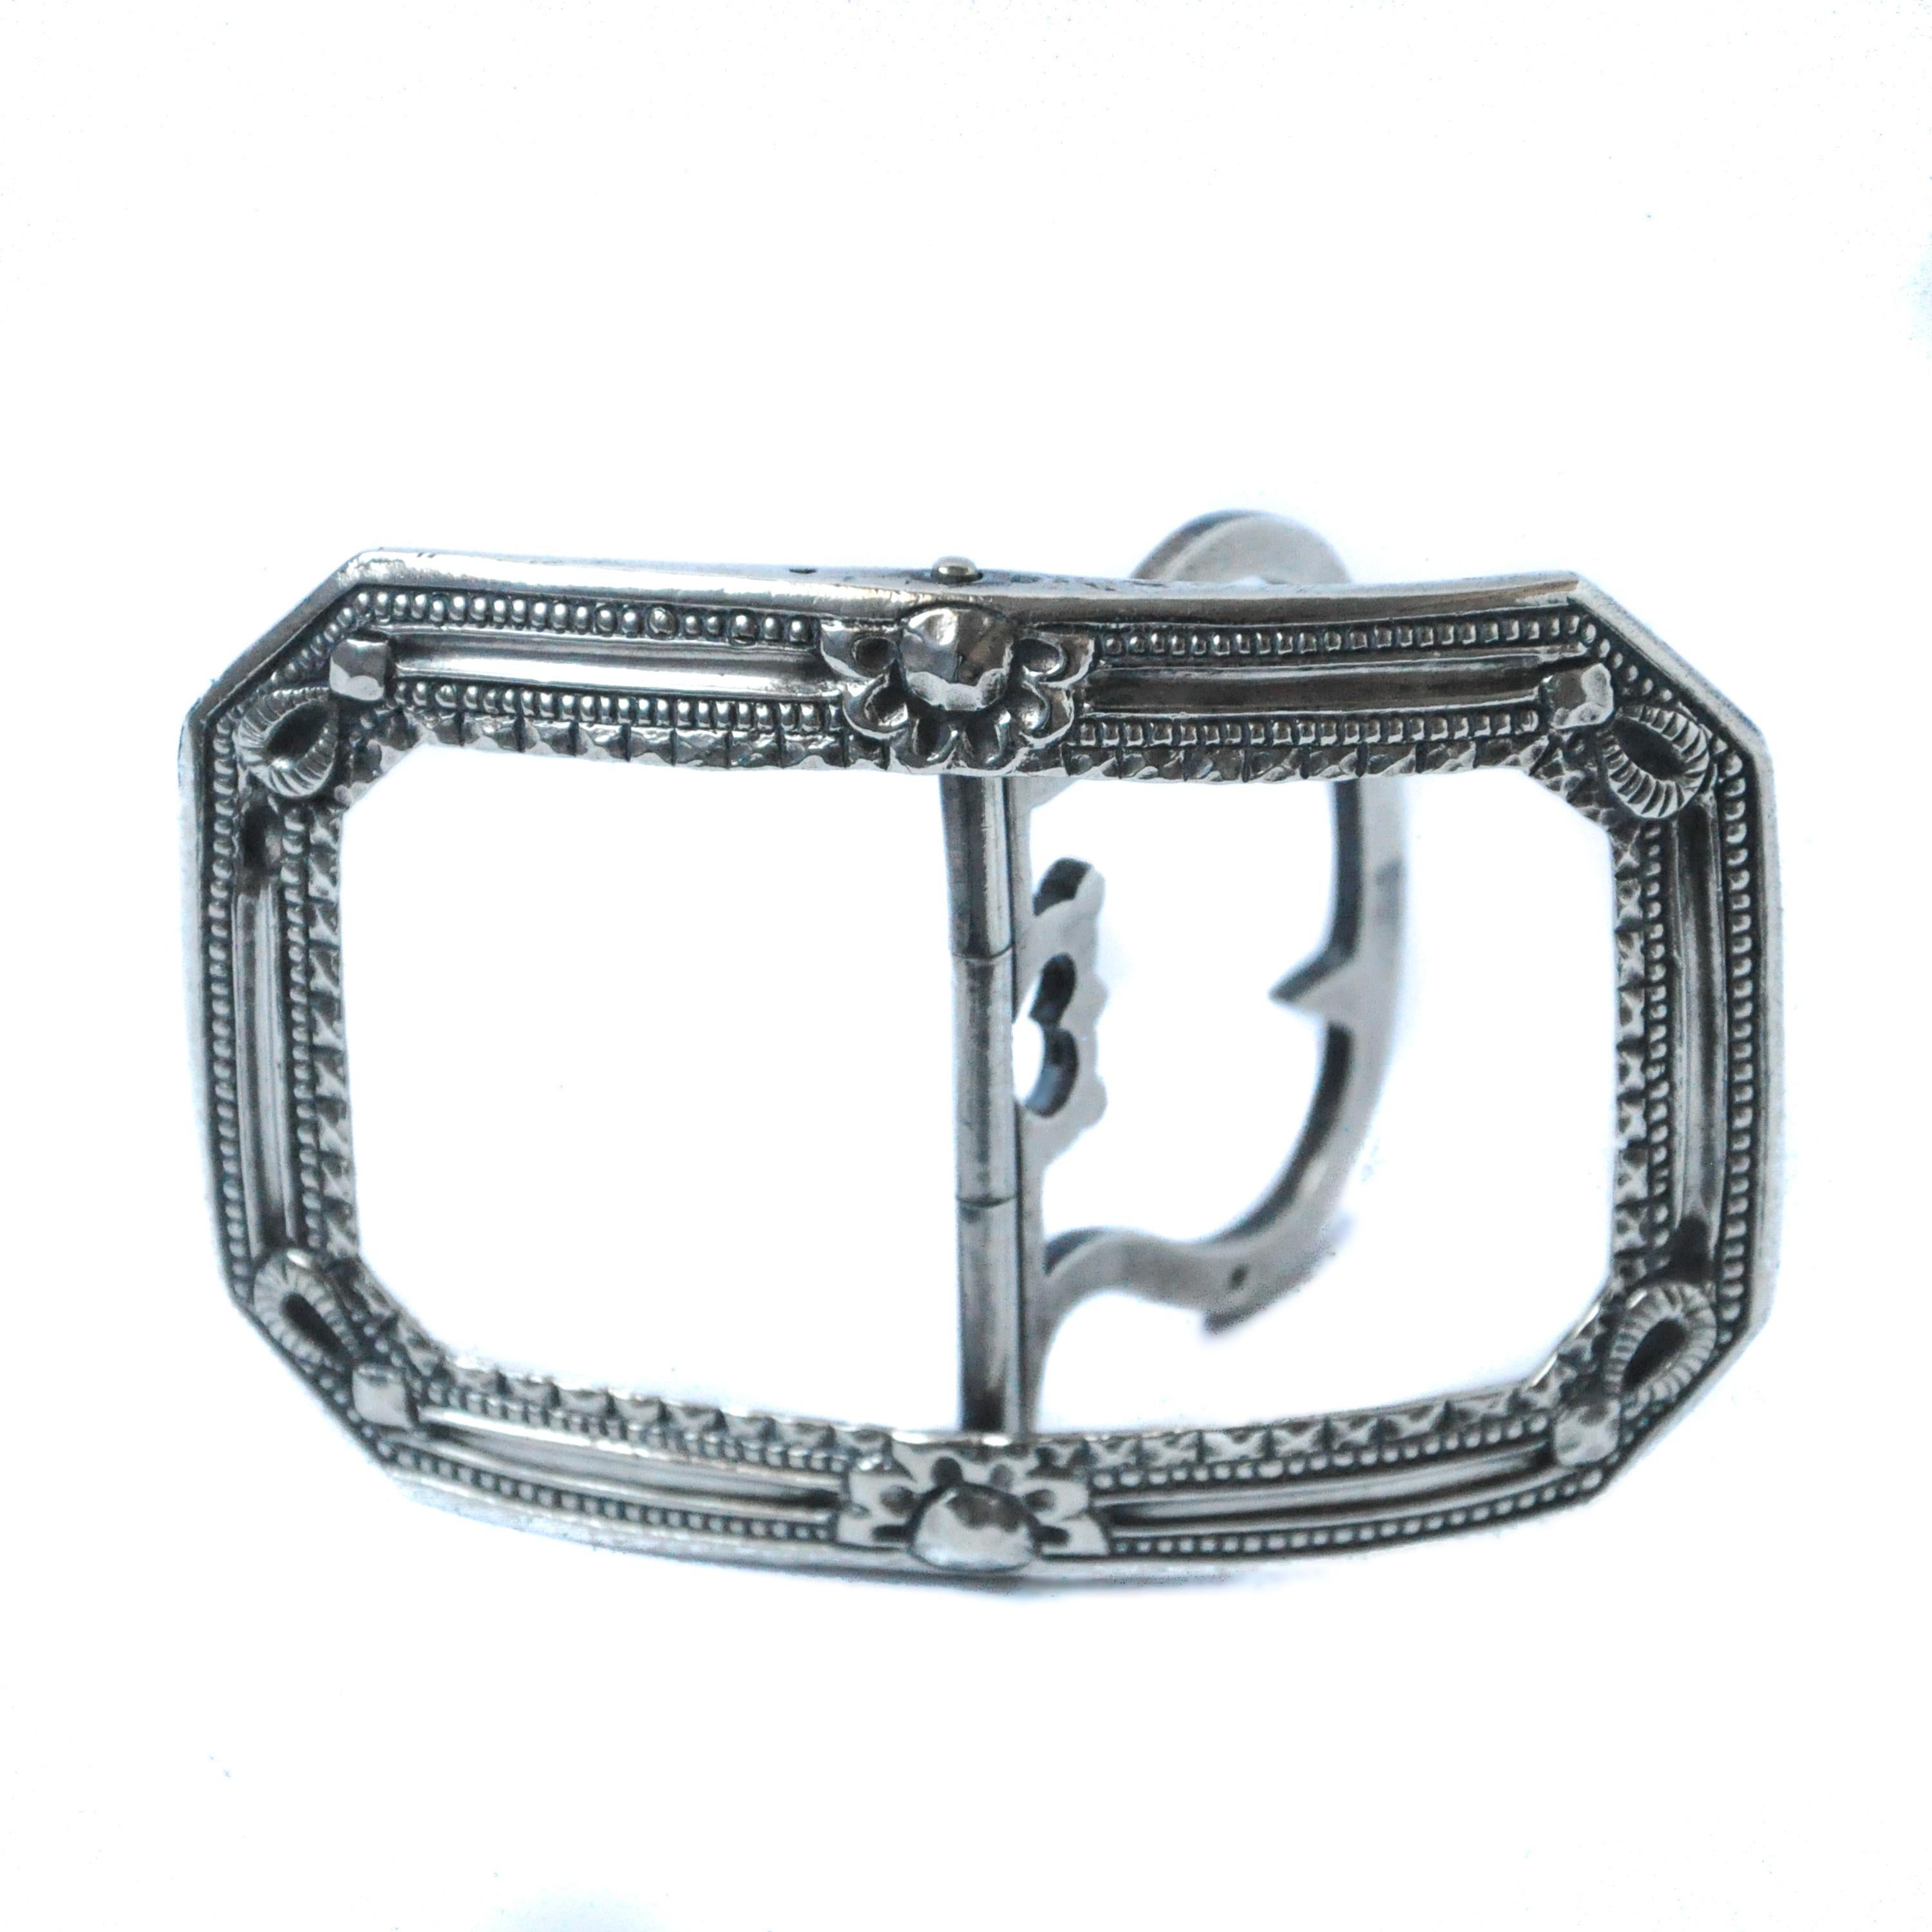 This silver rectangular curved sash buckle is made in early nineteenth century, Georgian era. The central pillar is hinged with a two-prong, which is flanked by an openwork heart-shaped motif. Furthermore, two rosettes and fantasy motifs are etched